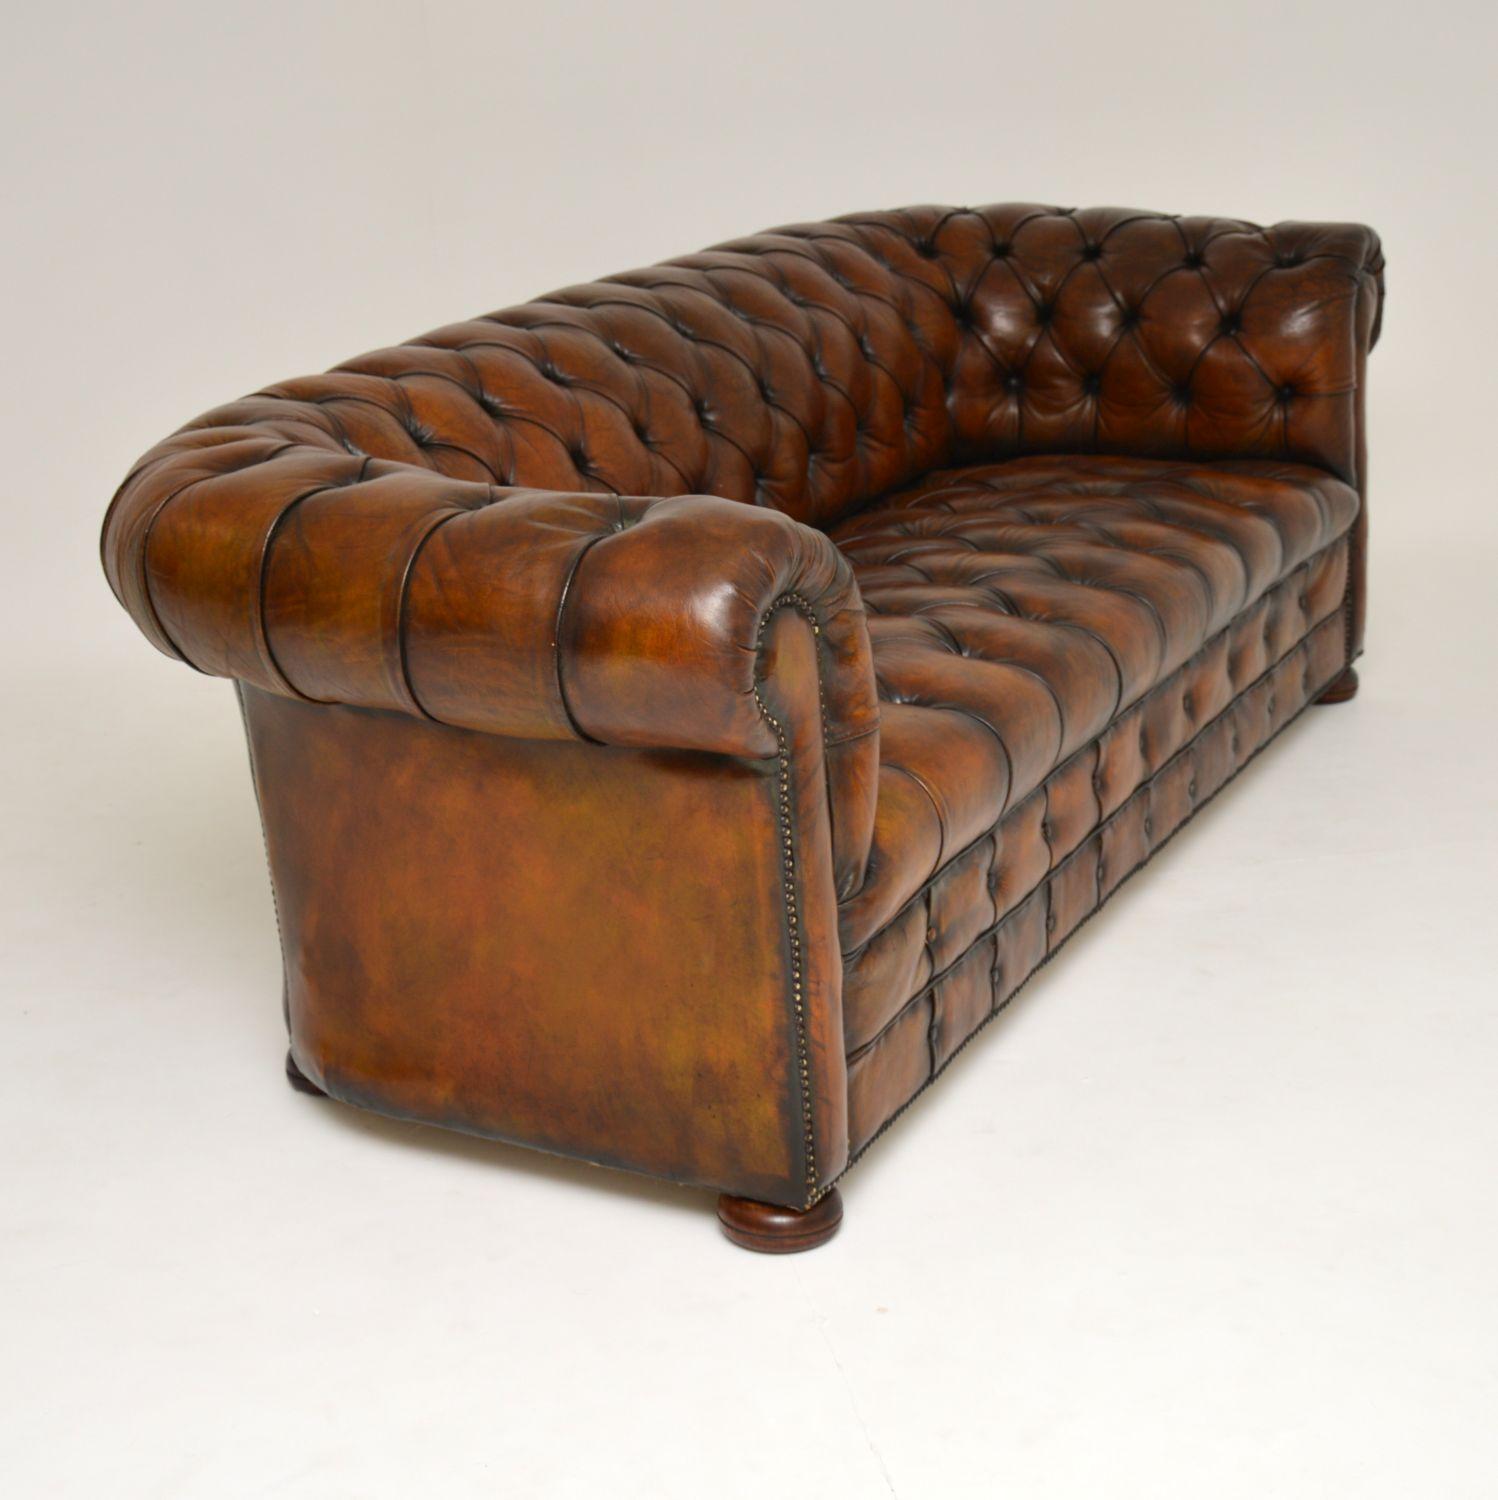 Victorian Antique Deep Buttoned Leather Chesterfield Sofa